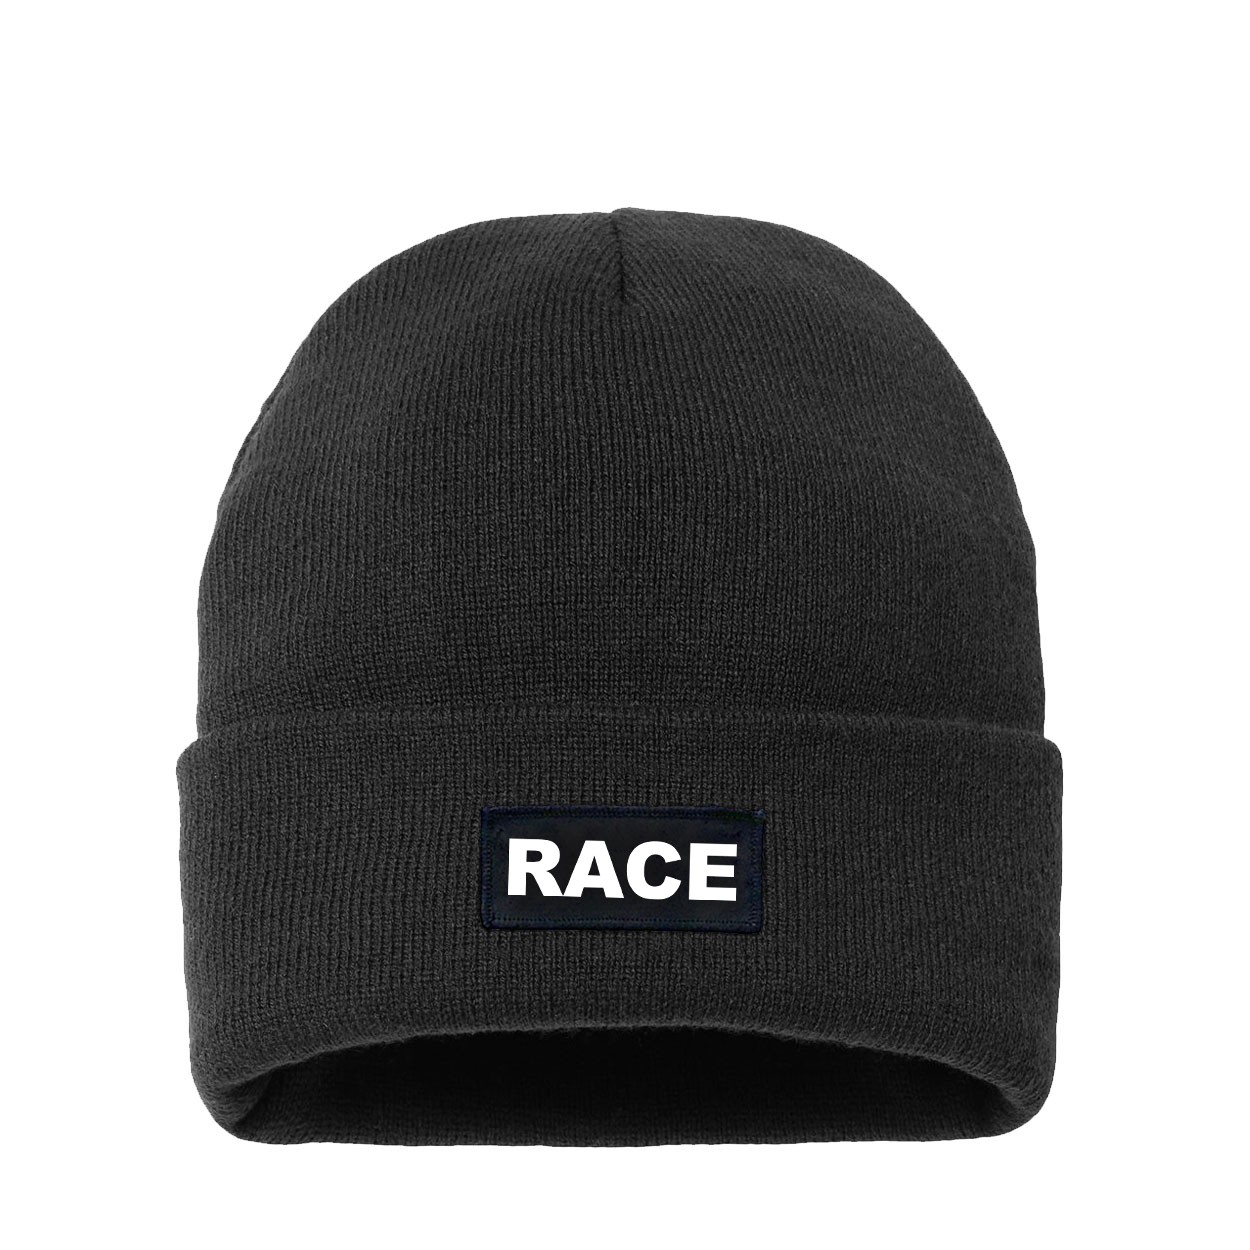 Race Brand Logo Night Out Woven Patch Night Out Sherpa Lined Cuffed Beanie Black